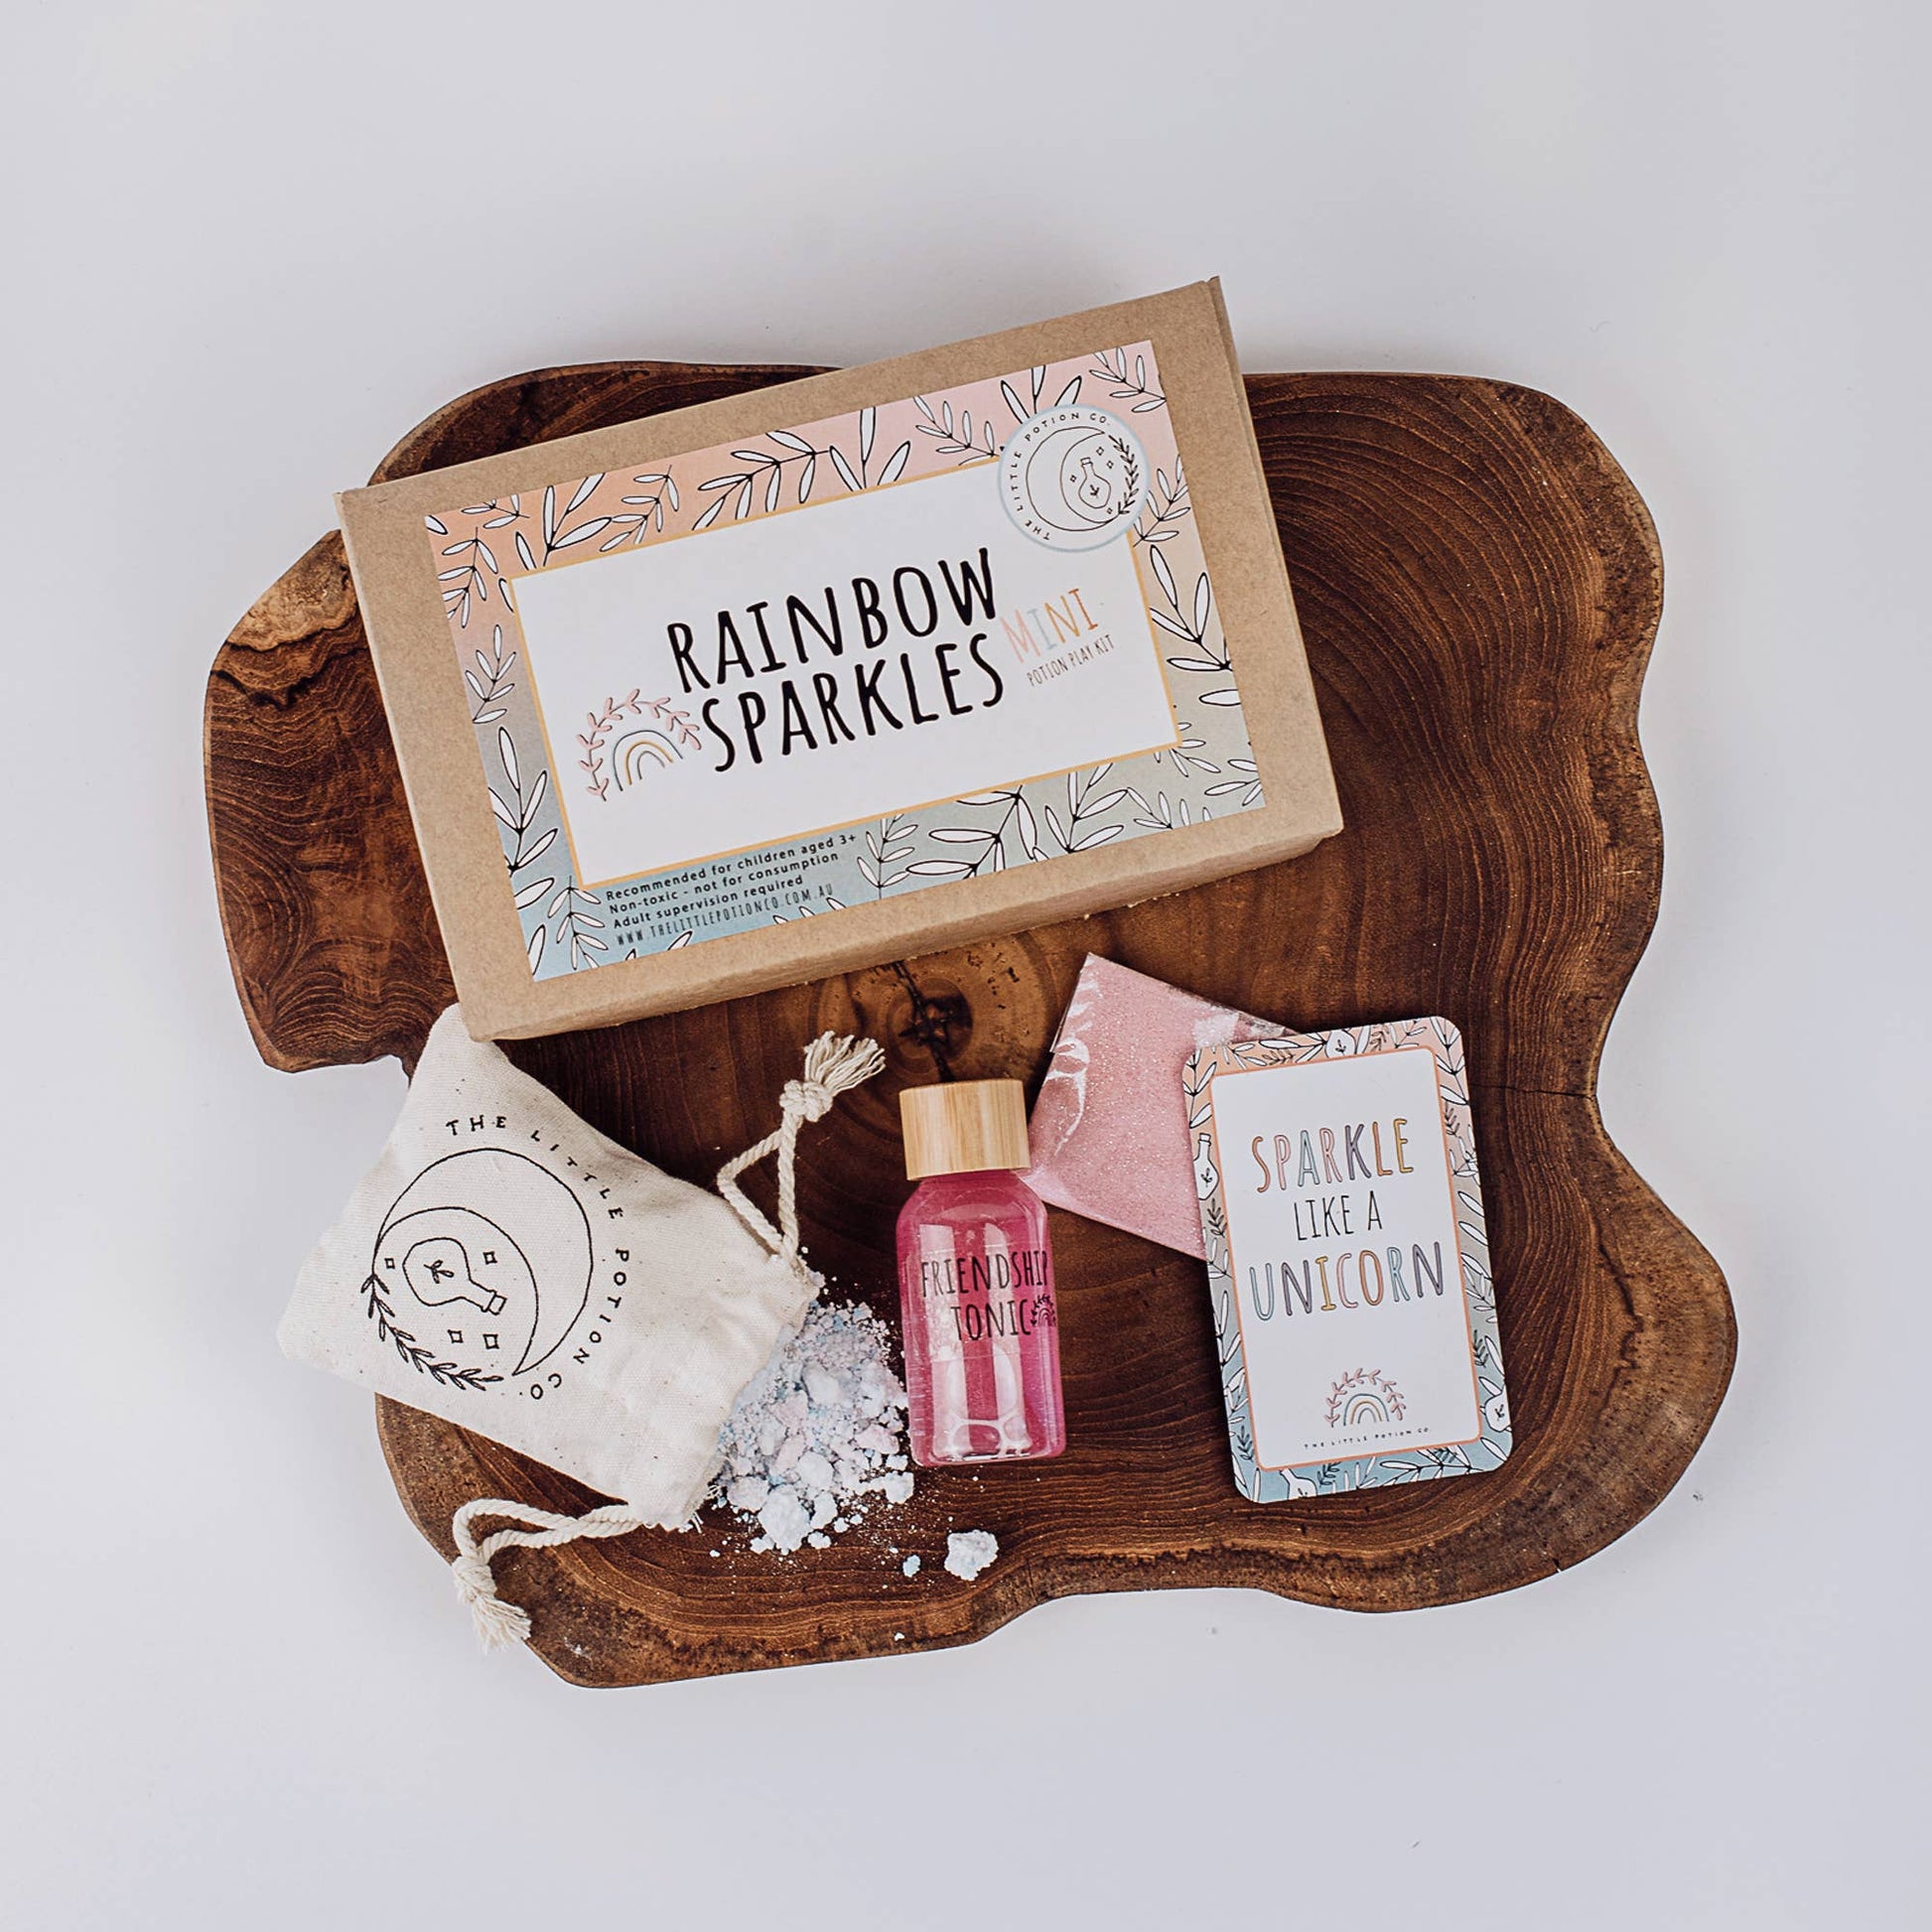  These mini kits allow children to explore the wonders of magic, and are perfect for learning how to express themselves.  This Sparkly mini kit is for those who dream of meeting a unicorn and wish on rainbows. Create potions for Love, friendship and hope with this kit. 